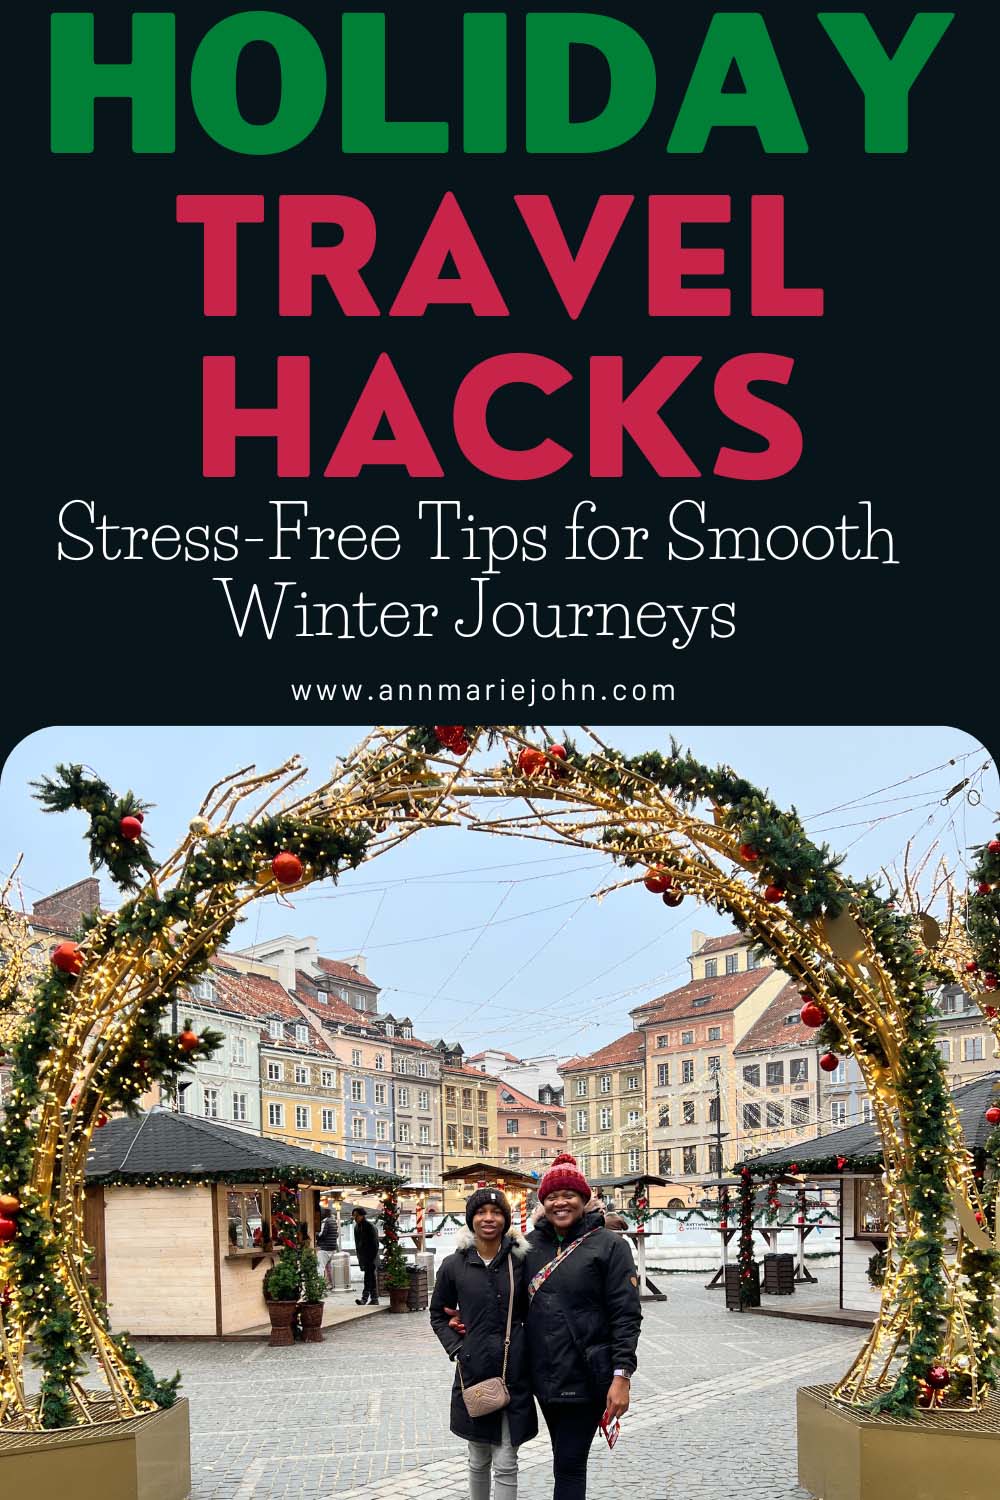 Holiday Travel Hacks: Stress-Free Tips for Smooth Winter Journeys